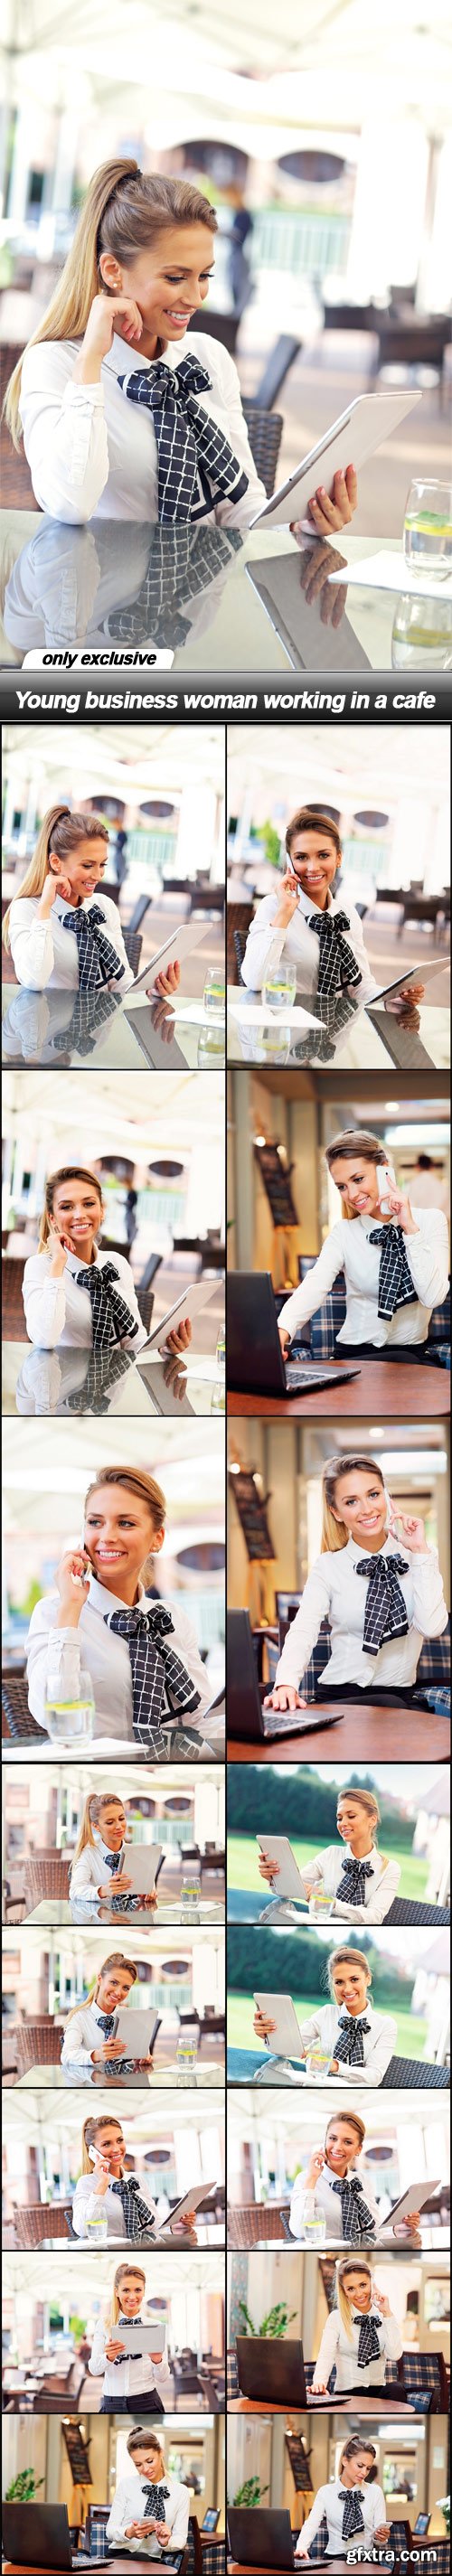 Young business woman working in a cafe - 16 UHQ JPEG